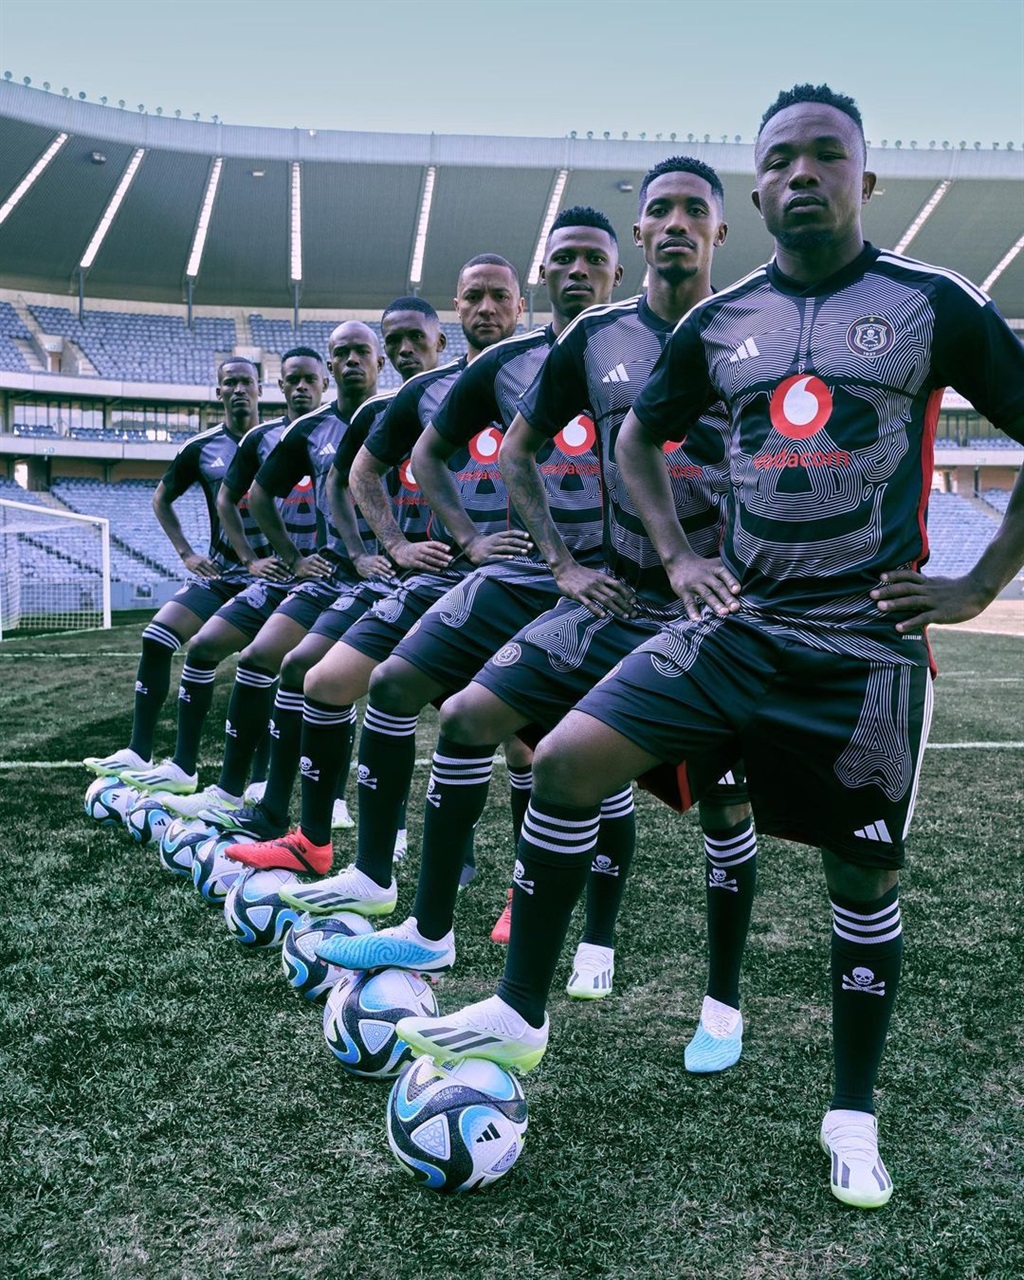 Get Your Soccer On With The Orlando Pirates Jersey - Feature 88